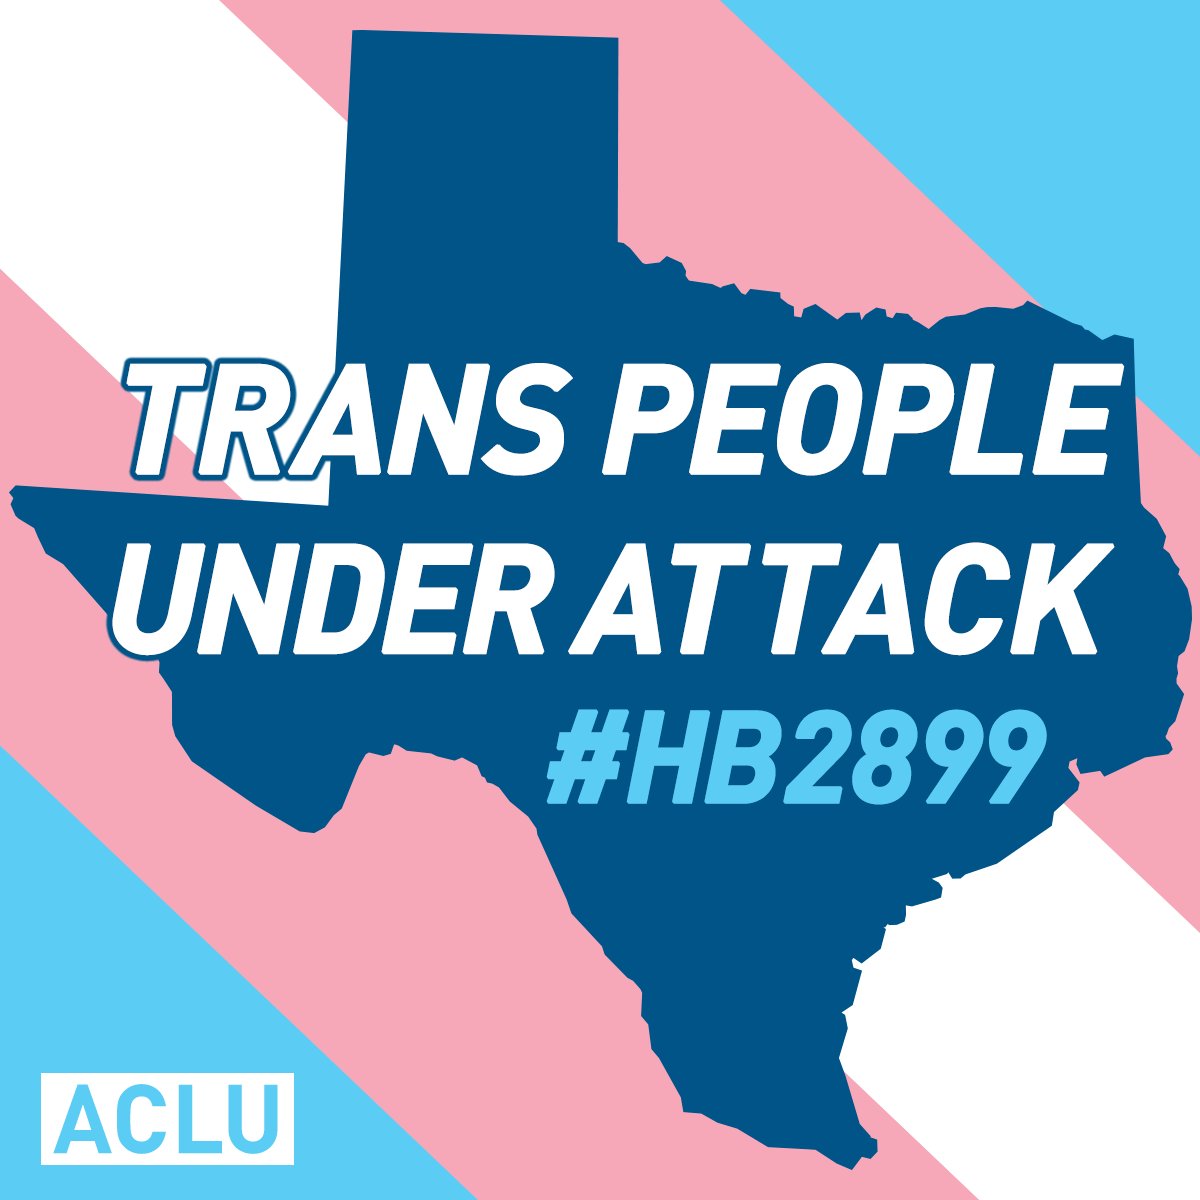 Texas is pushing a new anti-trans bill. There's no such thing as 'compromising' on civil rights. #HB2899 aclu.org/blog/speak-fre… #HB2899